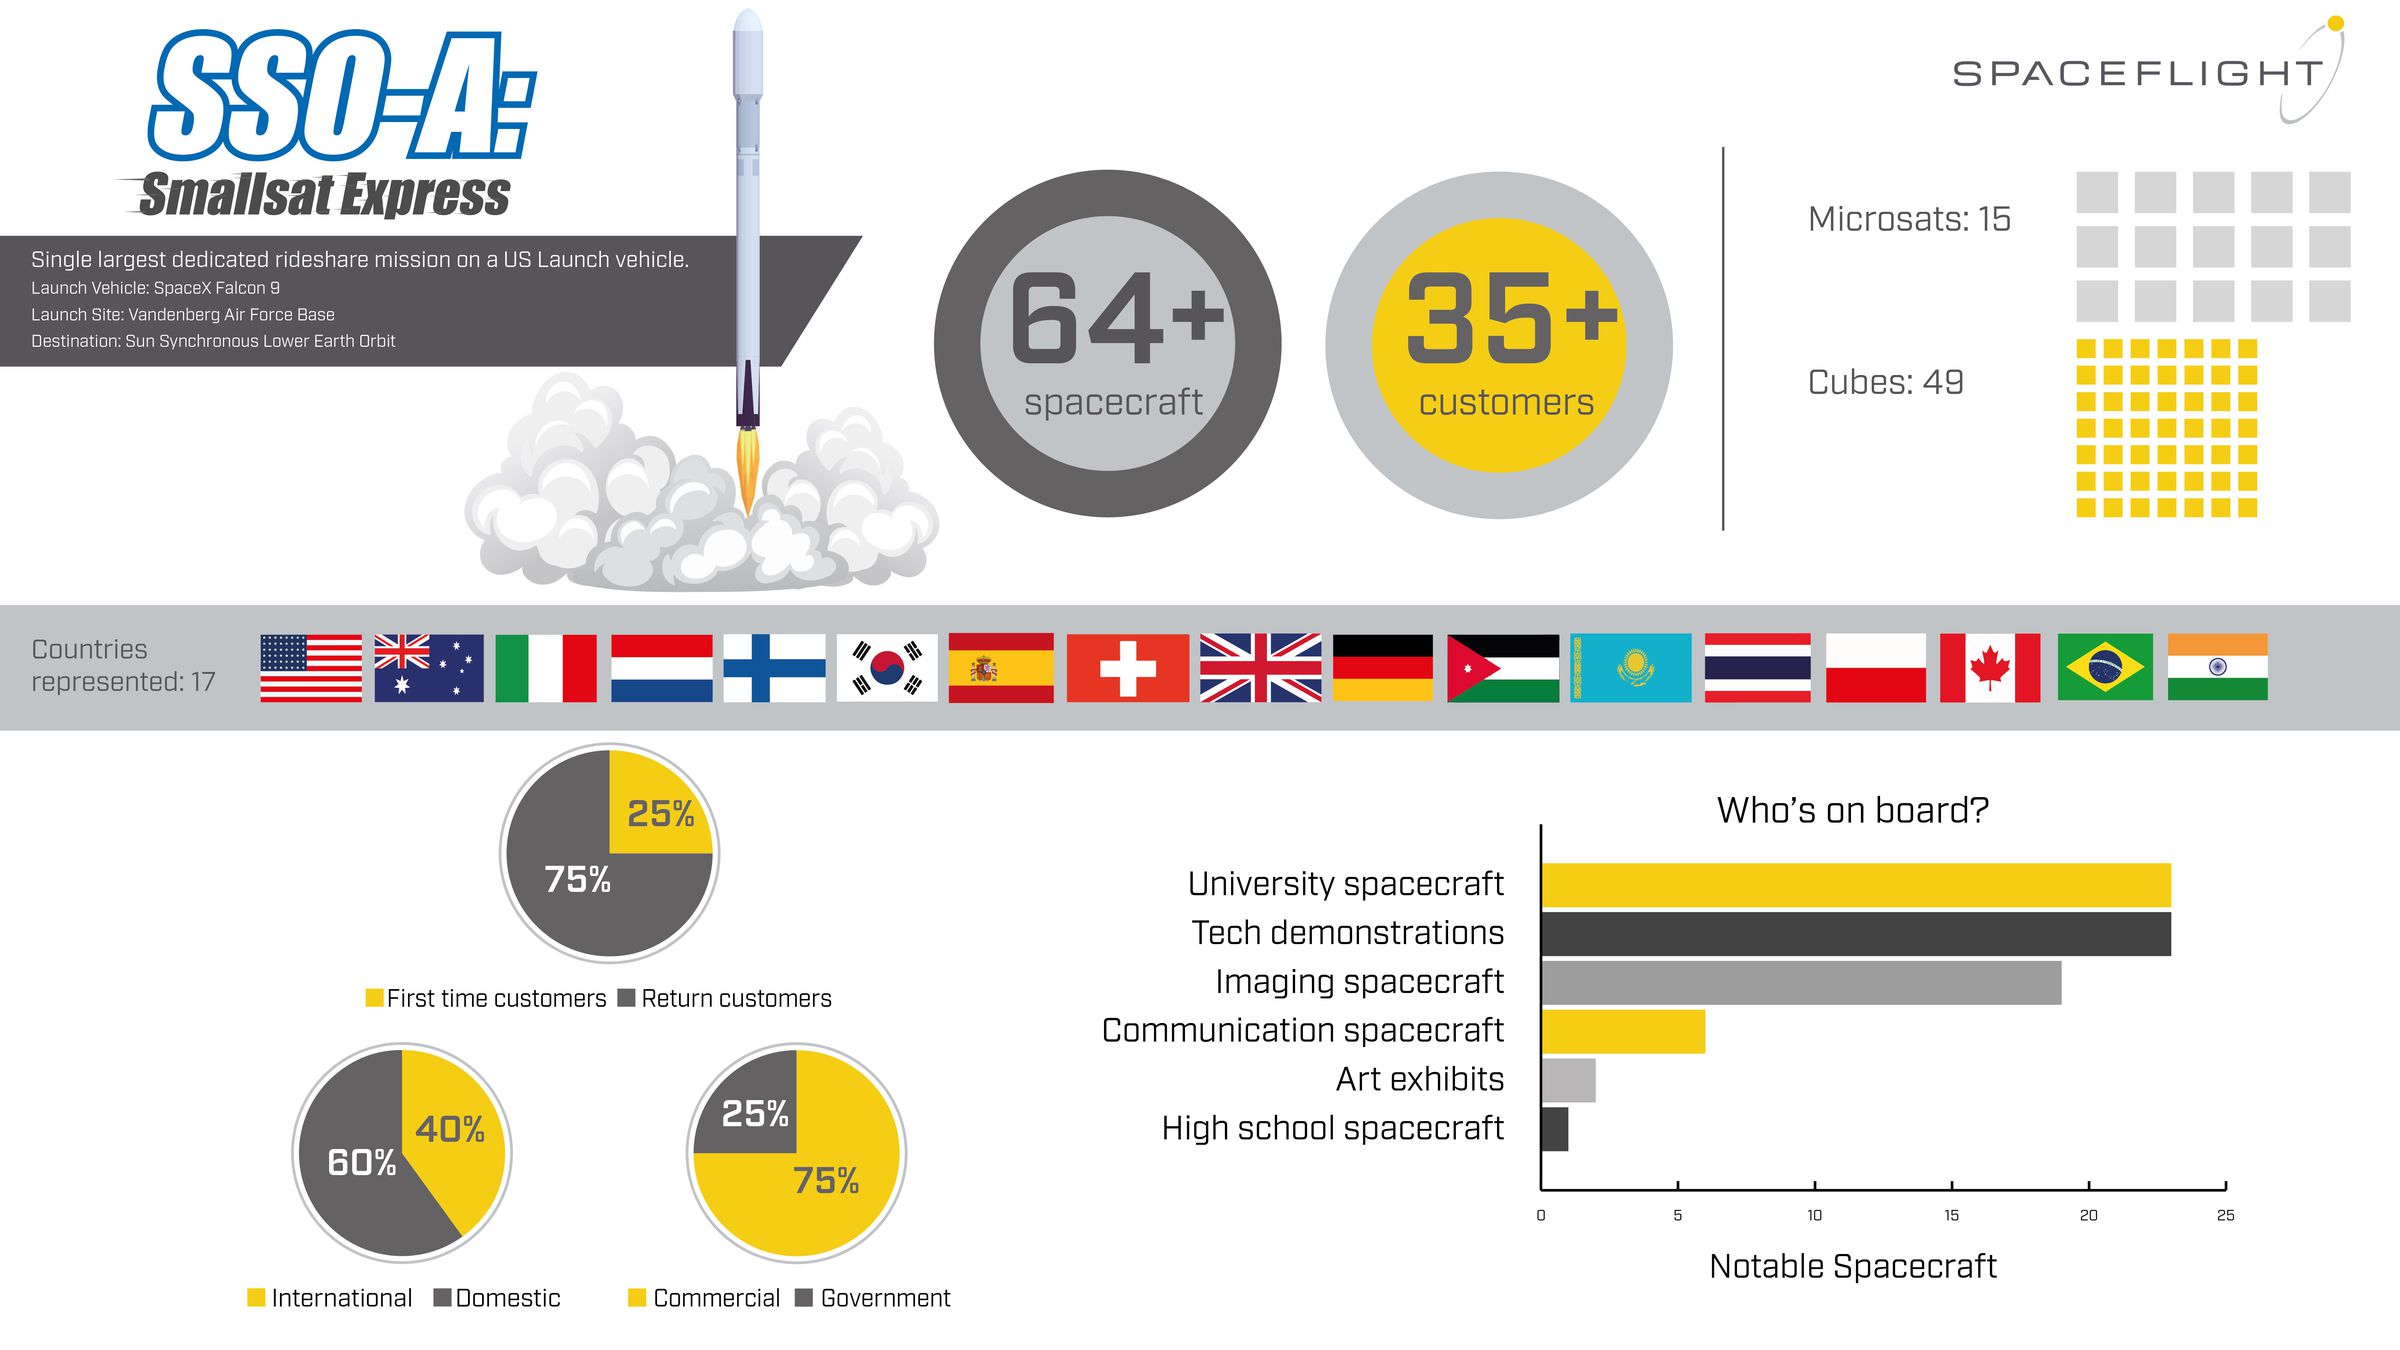 The infographic Spaceflight released before the SSO-A launch, detailing the diversity of satellites and operators.